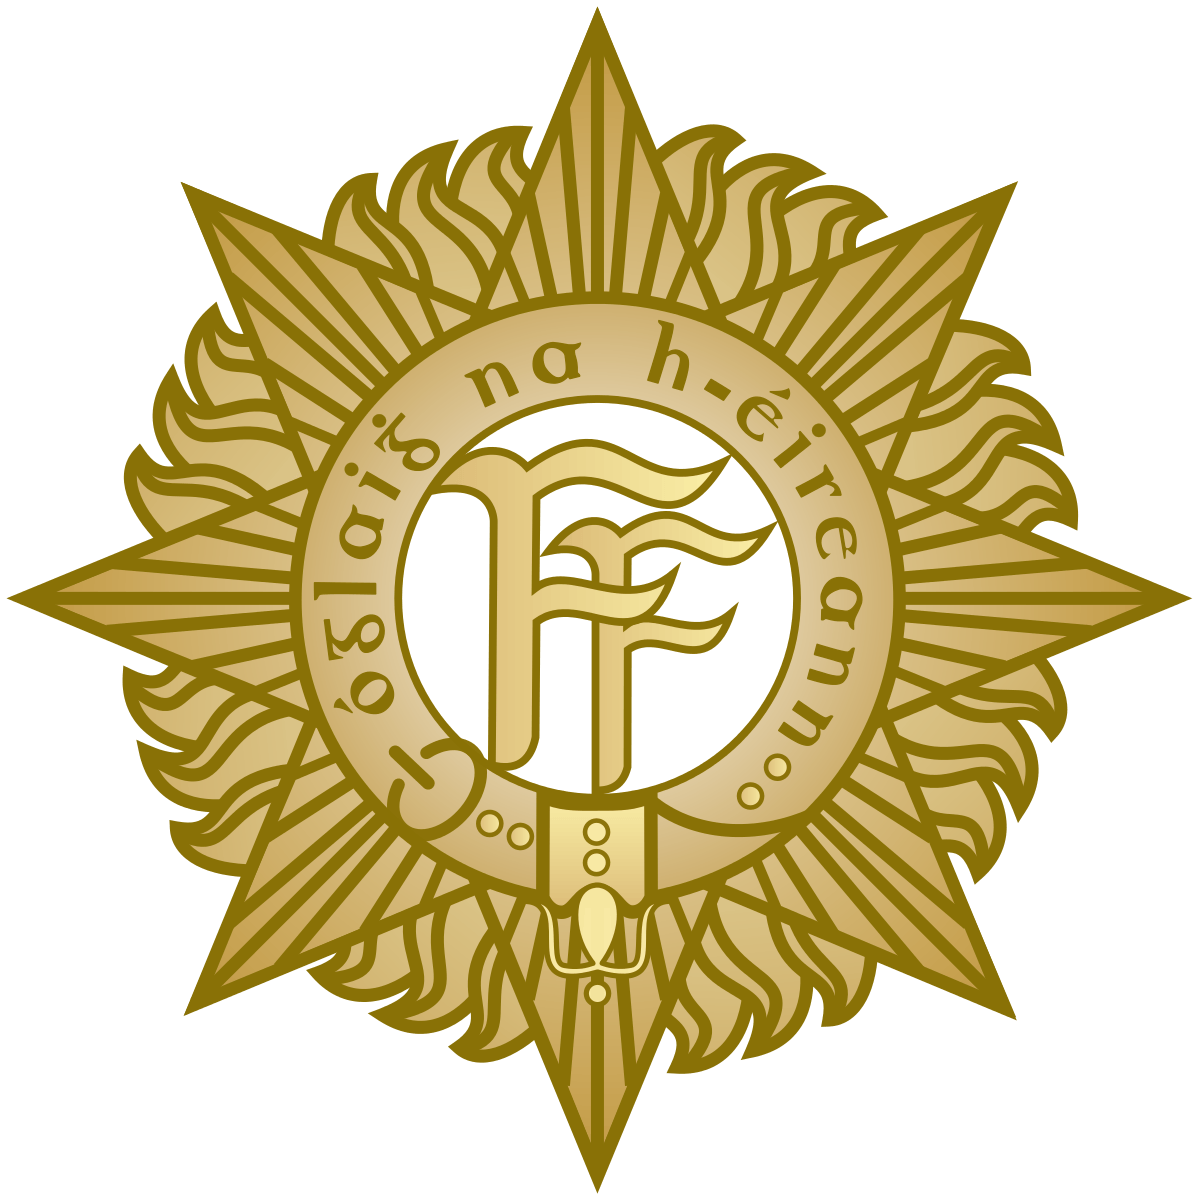 European Military Logo - Statement to the Dáil on the state of the Defence Forces